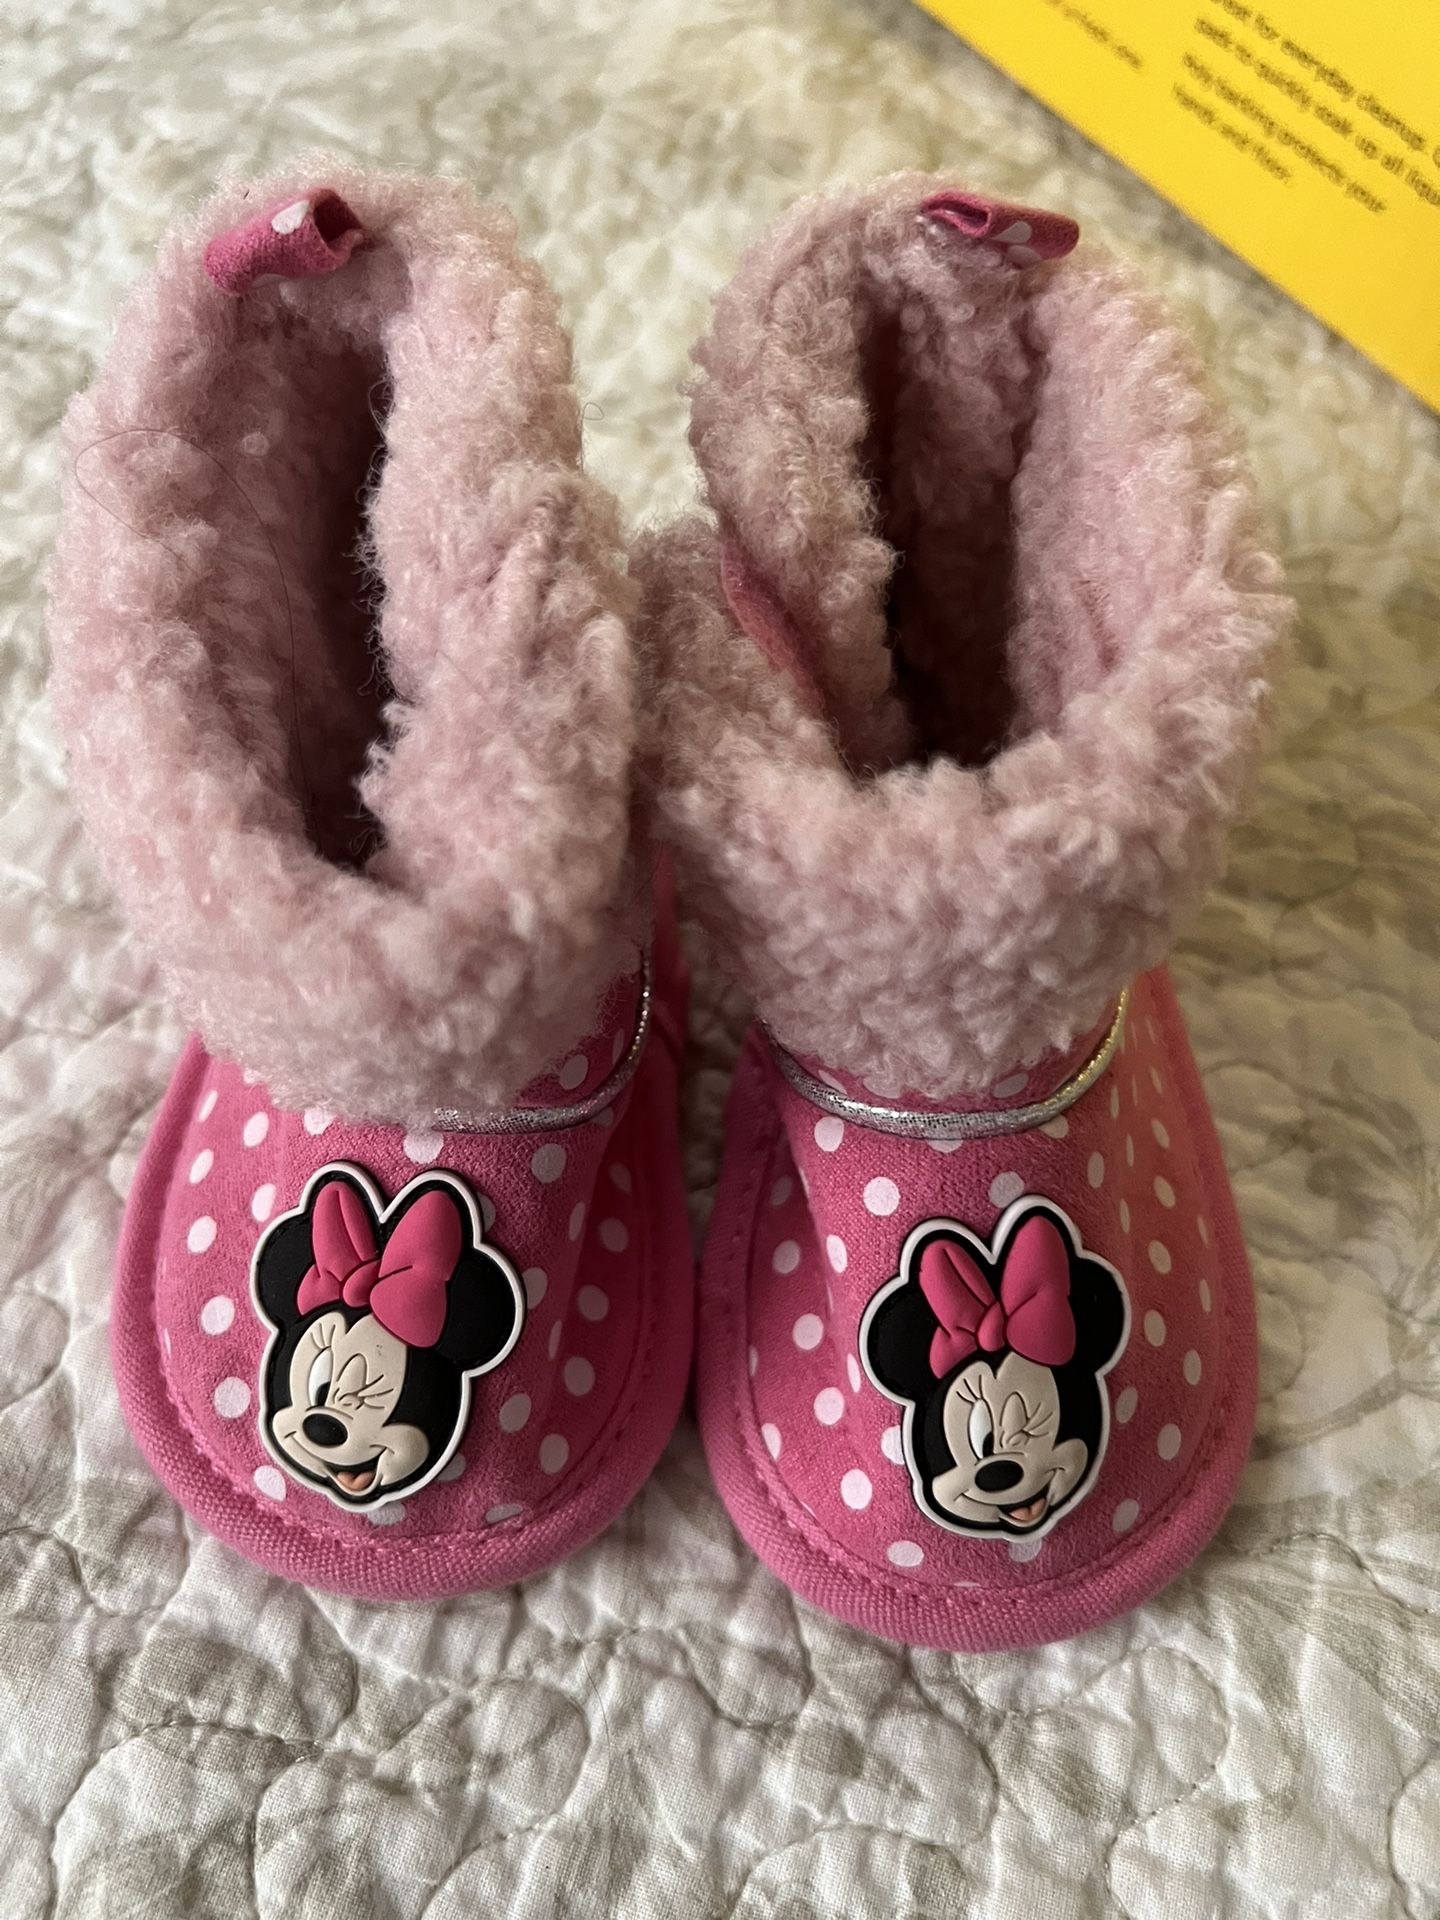 Minnie Mouse Infant Uggs Like Shoes, Size 9-12 Months